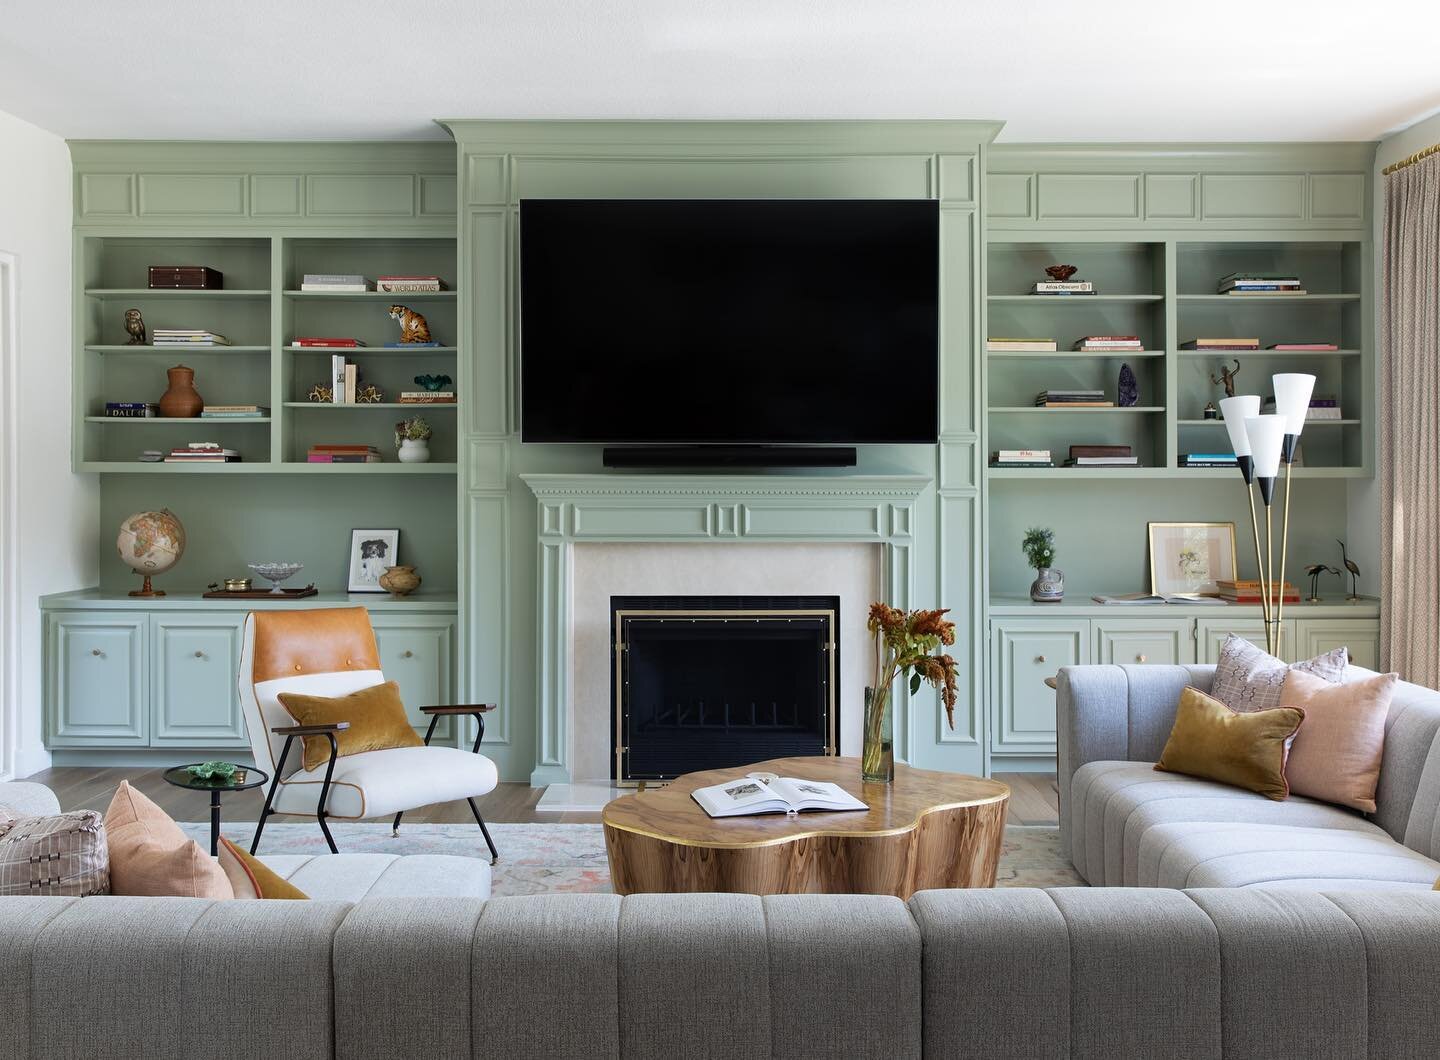 sometimes you just can&rsquo;t beat a before and after.  In this case we added millwork to some outdated 90&rsquo;s built in&rsquo;s and painted it in a bright and cheery shade of green ⚡️⚡️⚡️ as seen in @housebeautiful #sei2020 #seibeautifulbarclay 